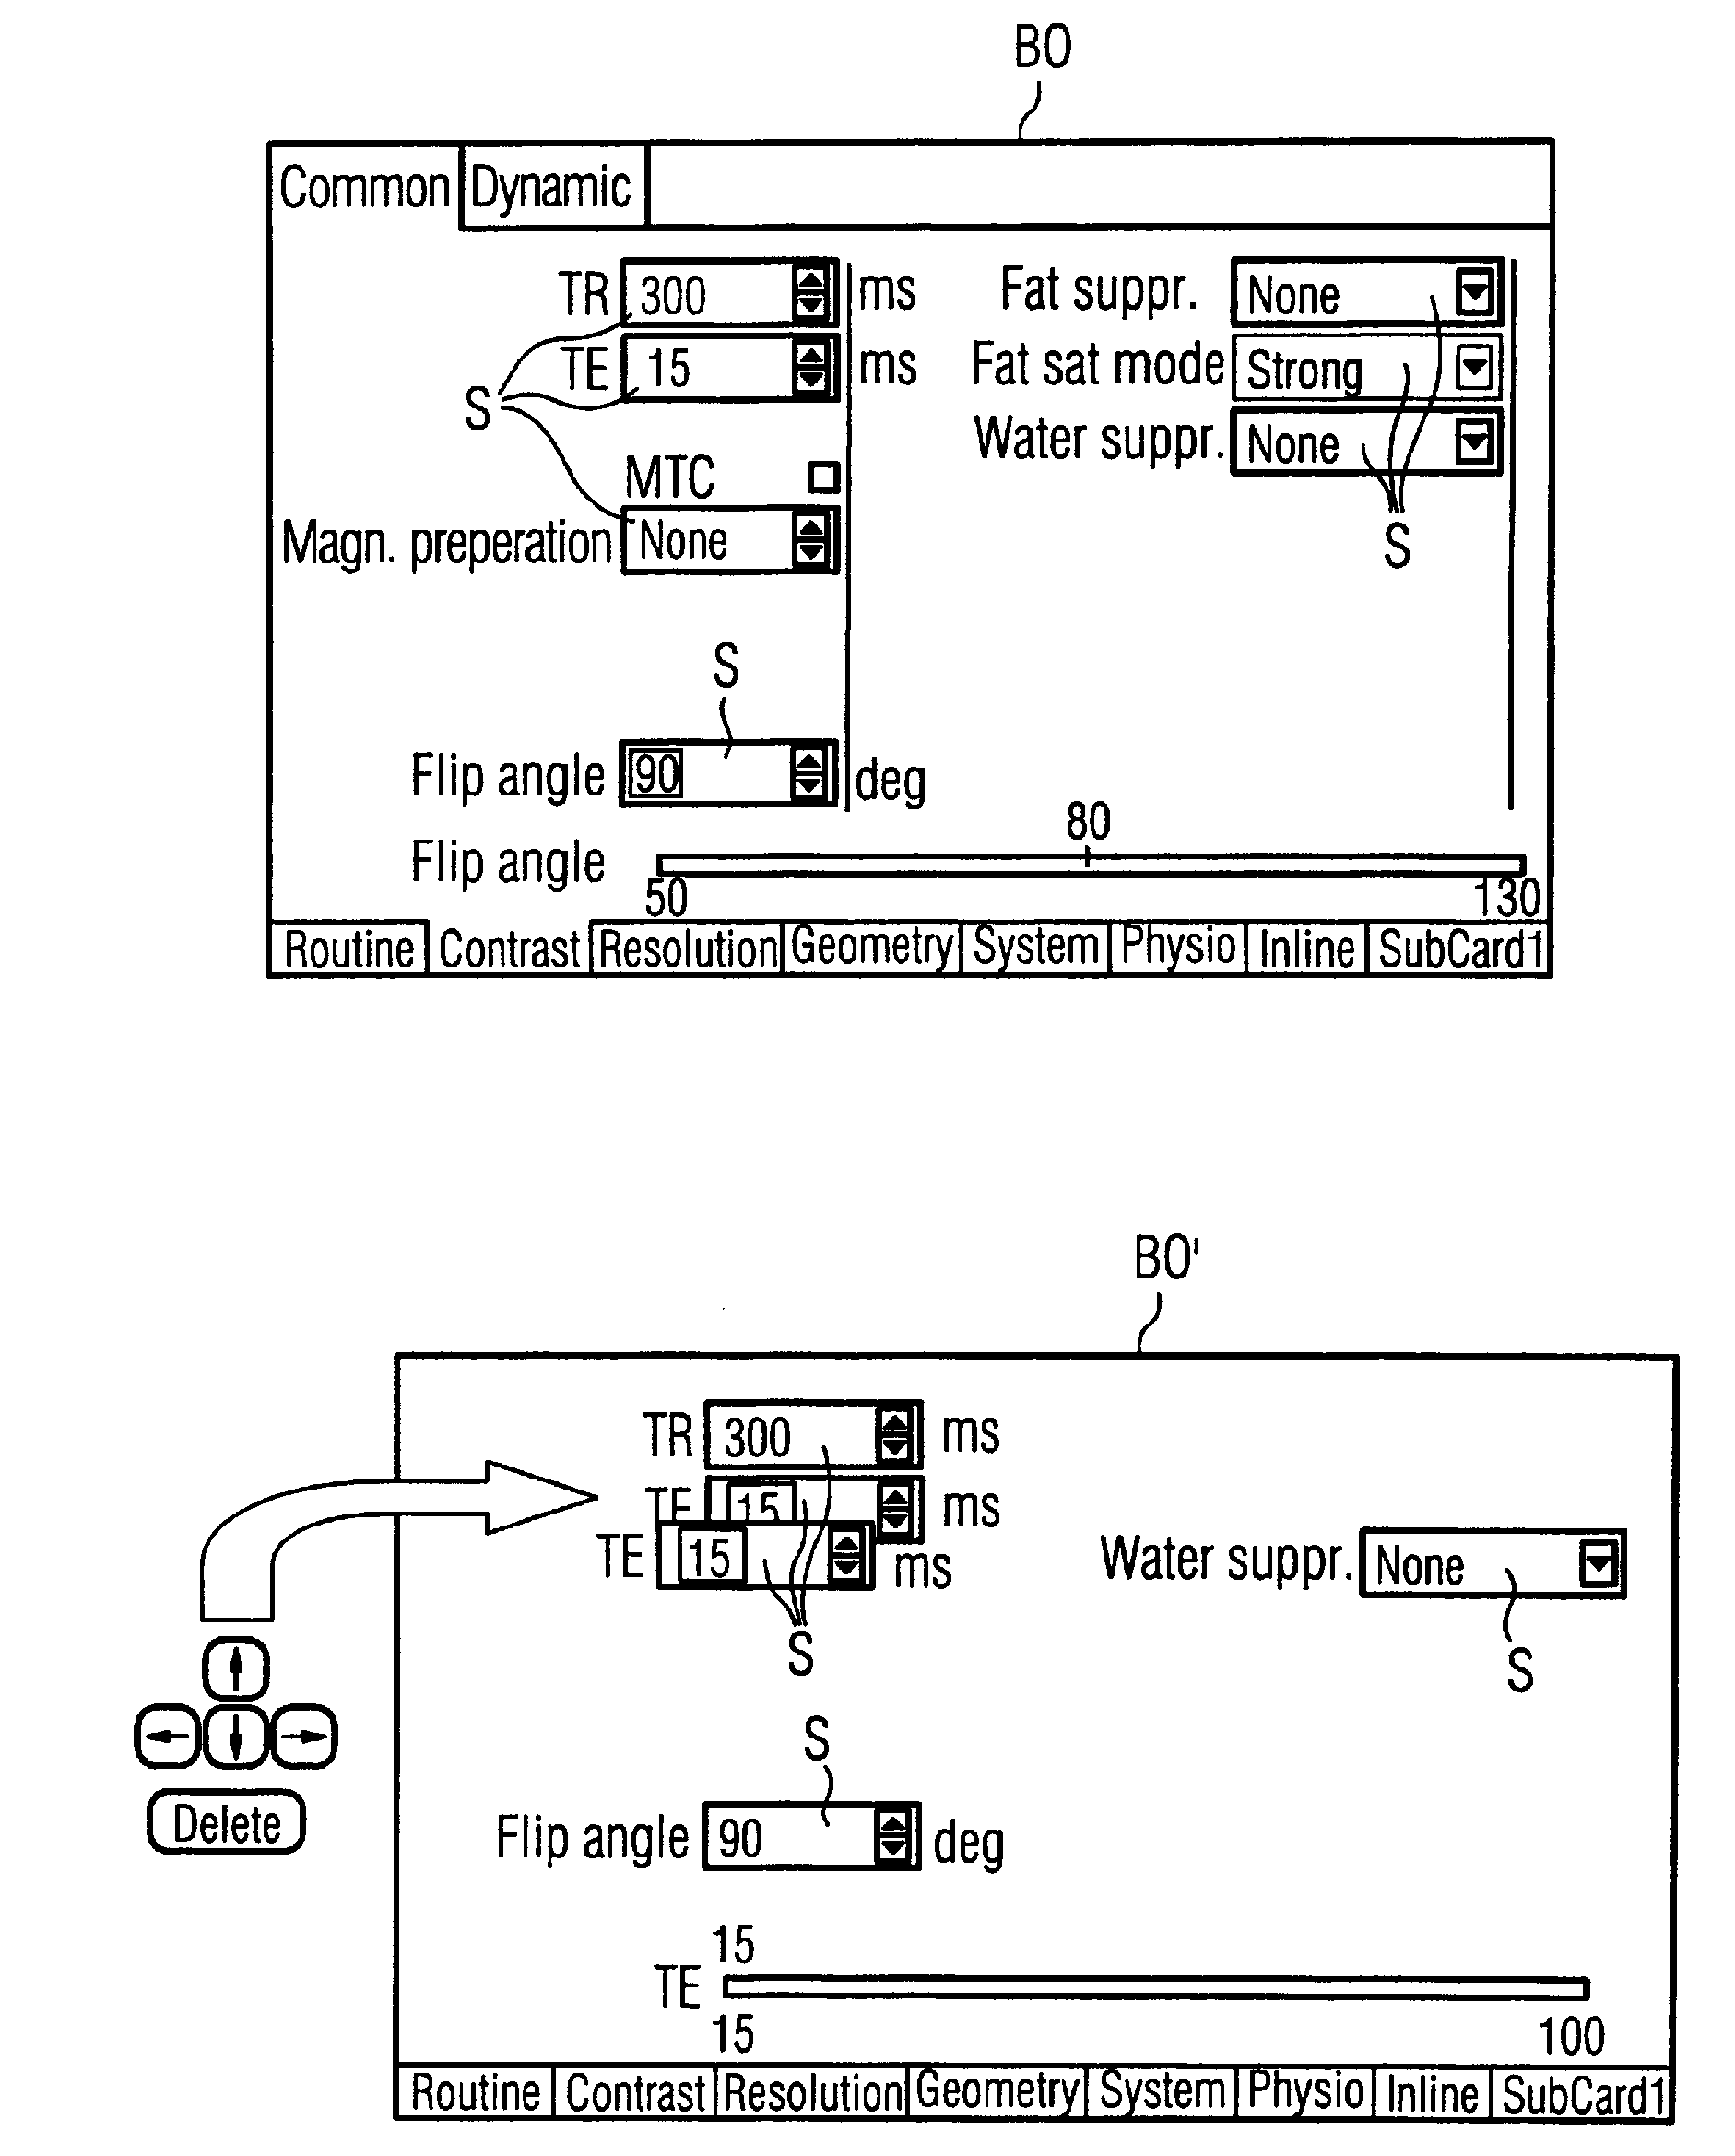 Method and system for generation of a user interface